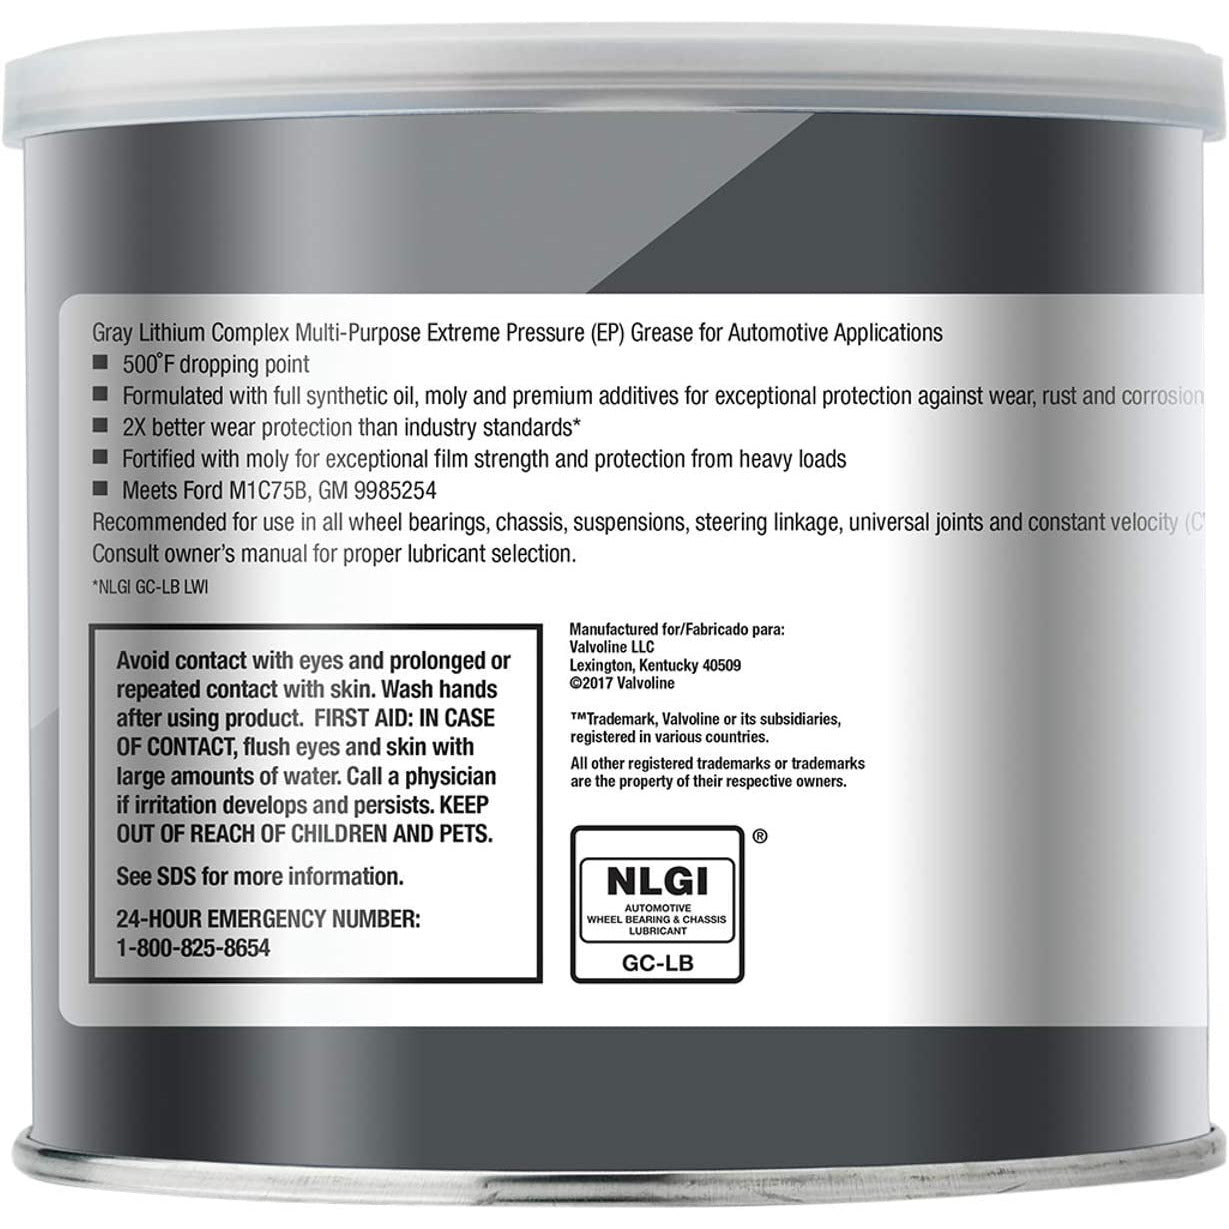 VAL VV986 Valvoline Full Synthetic Moly-Fortified Gray Grease (1 lb)